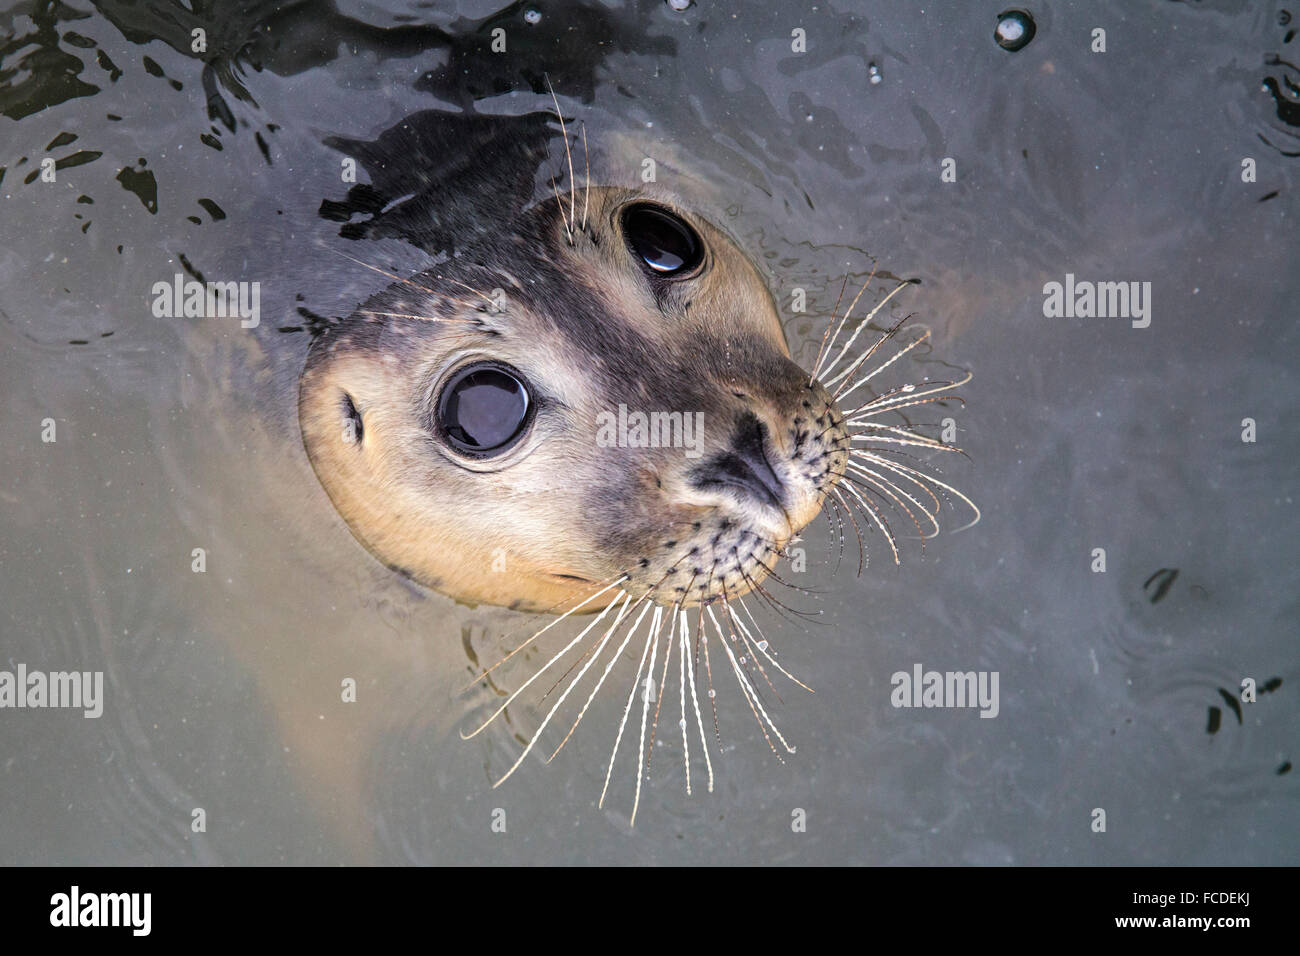 Netherlands, Renesse, Seal Stock Photo